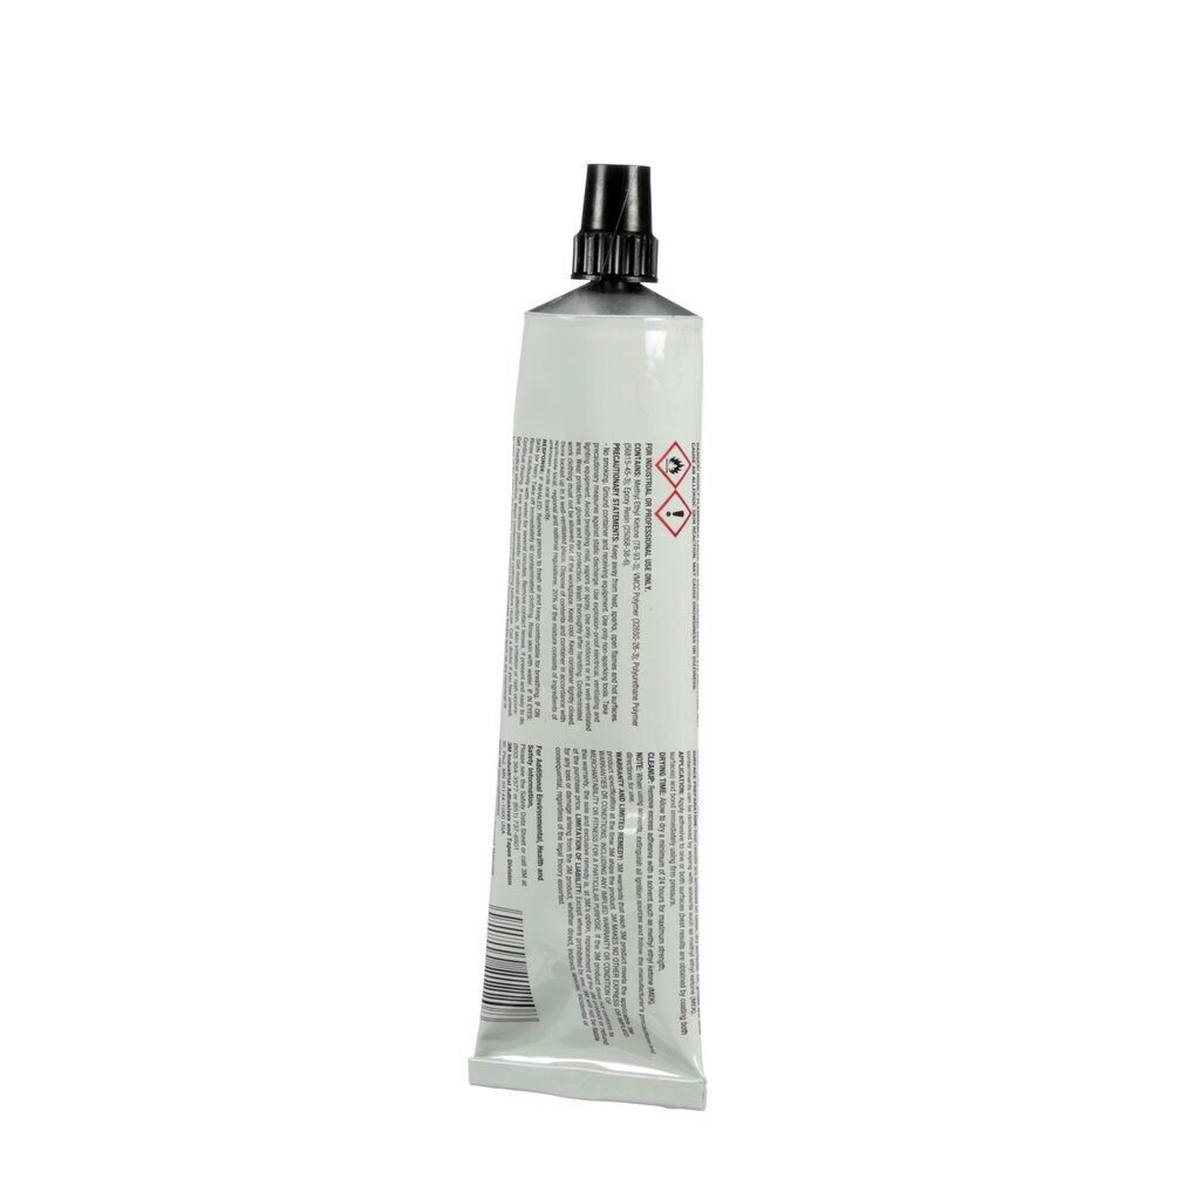 3M Scotch-Weld 4475 is a multipurpose copolymer based adhesive with 150ml